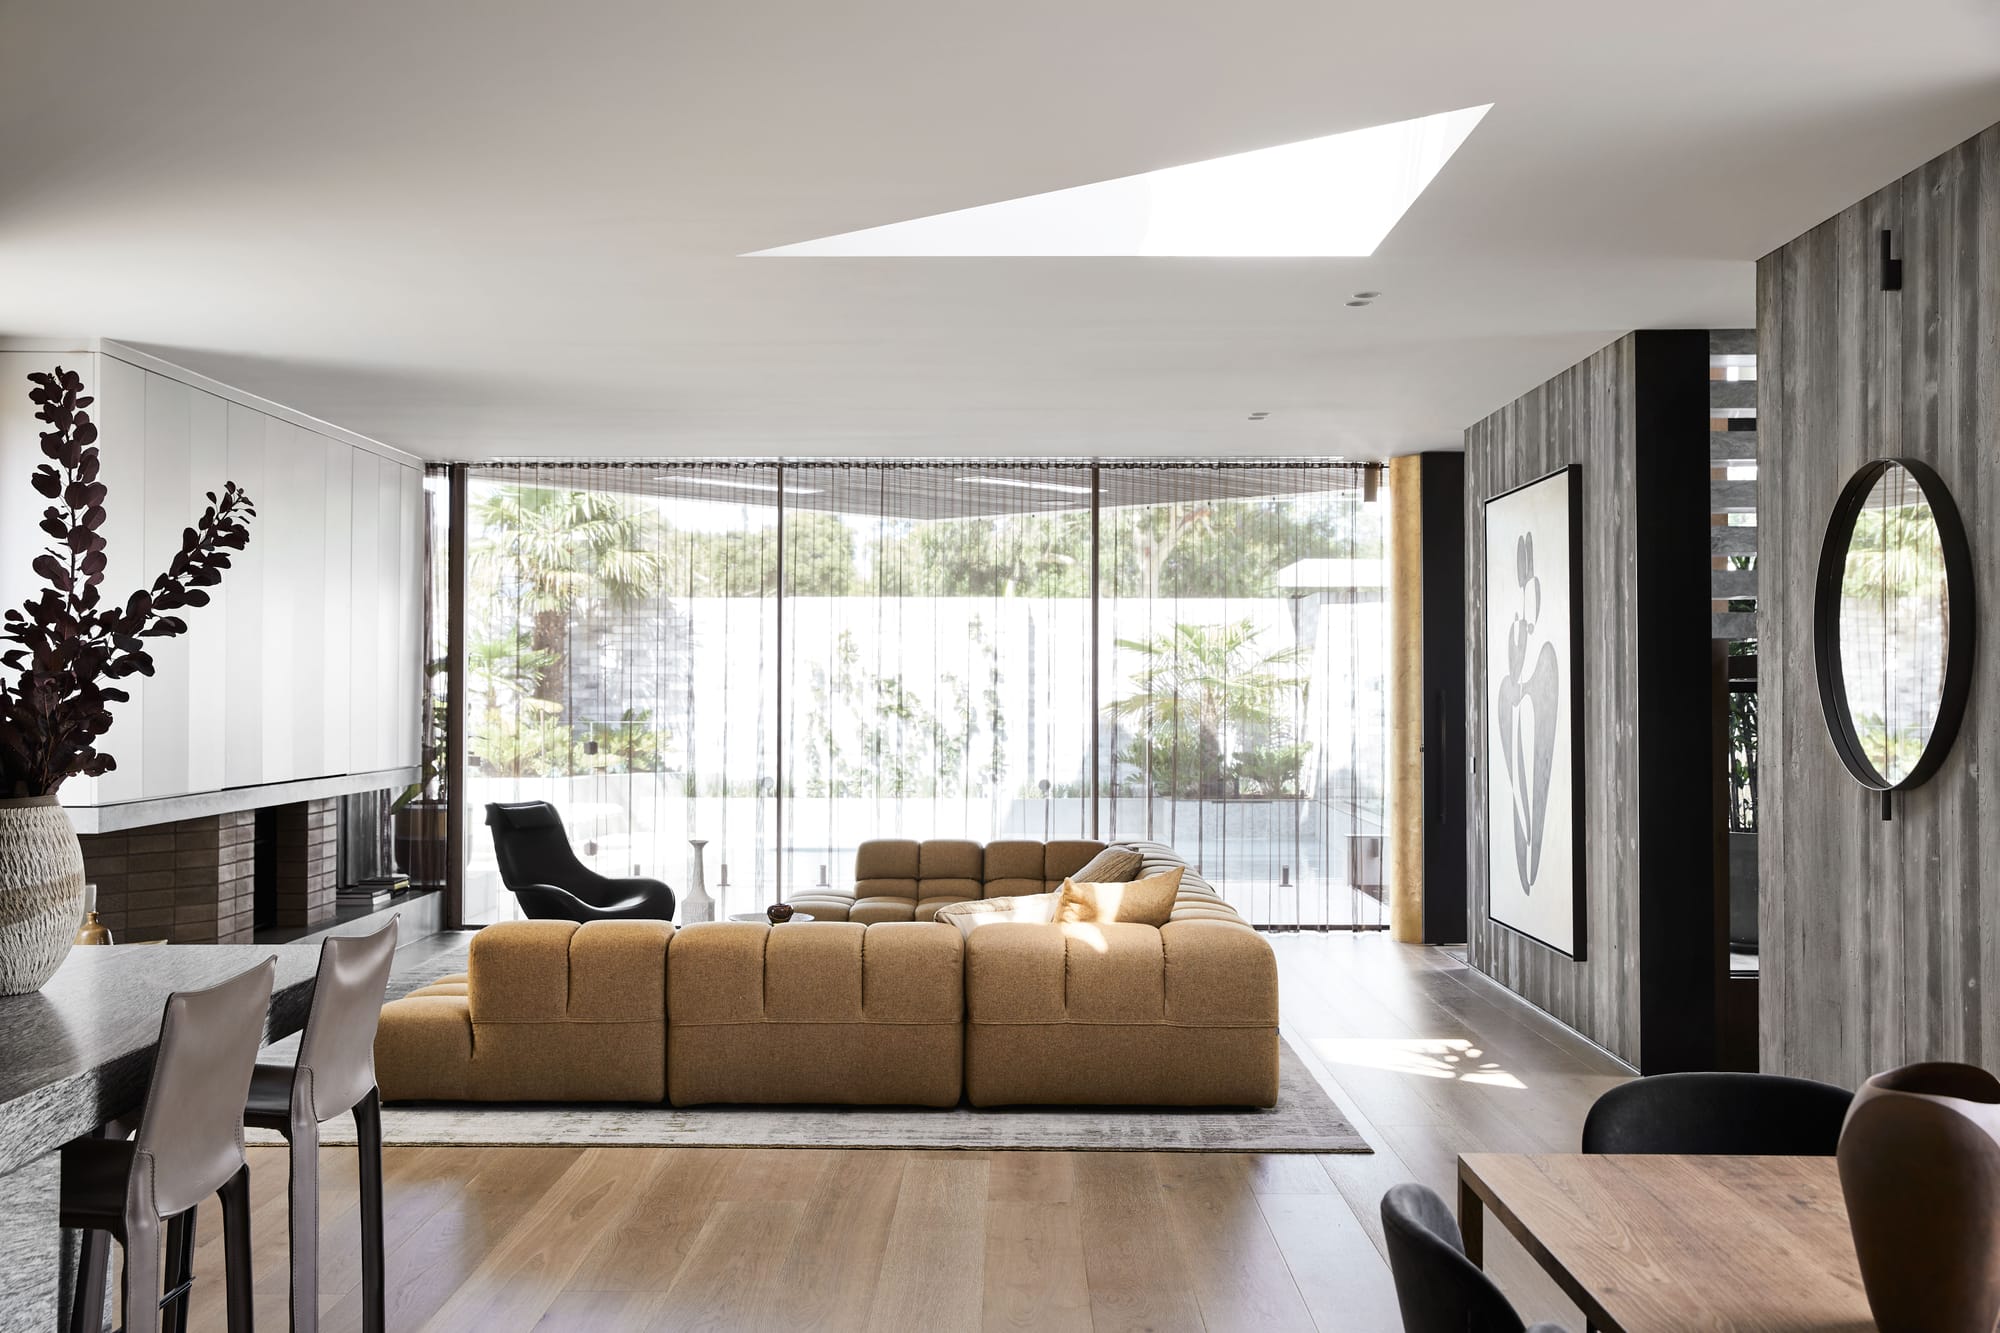 The Split Home by Seidler Group